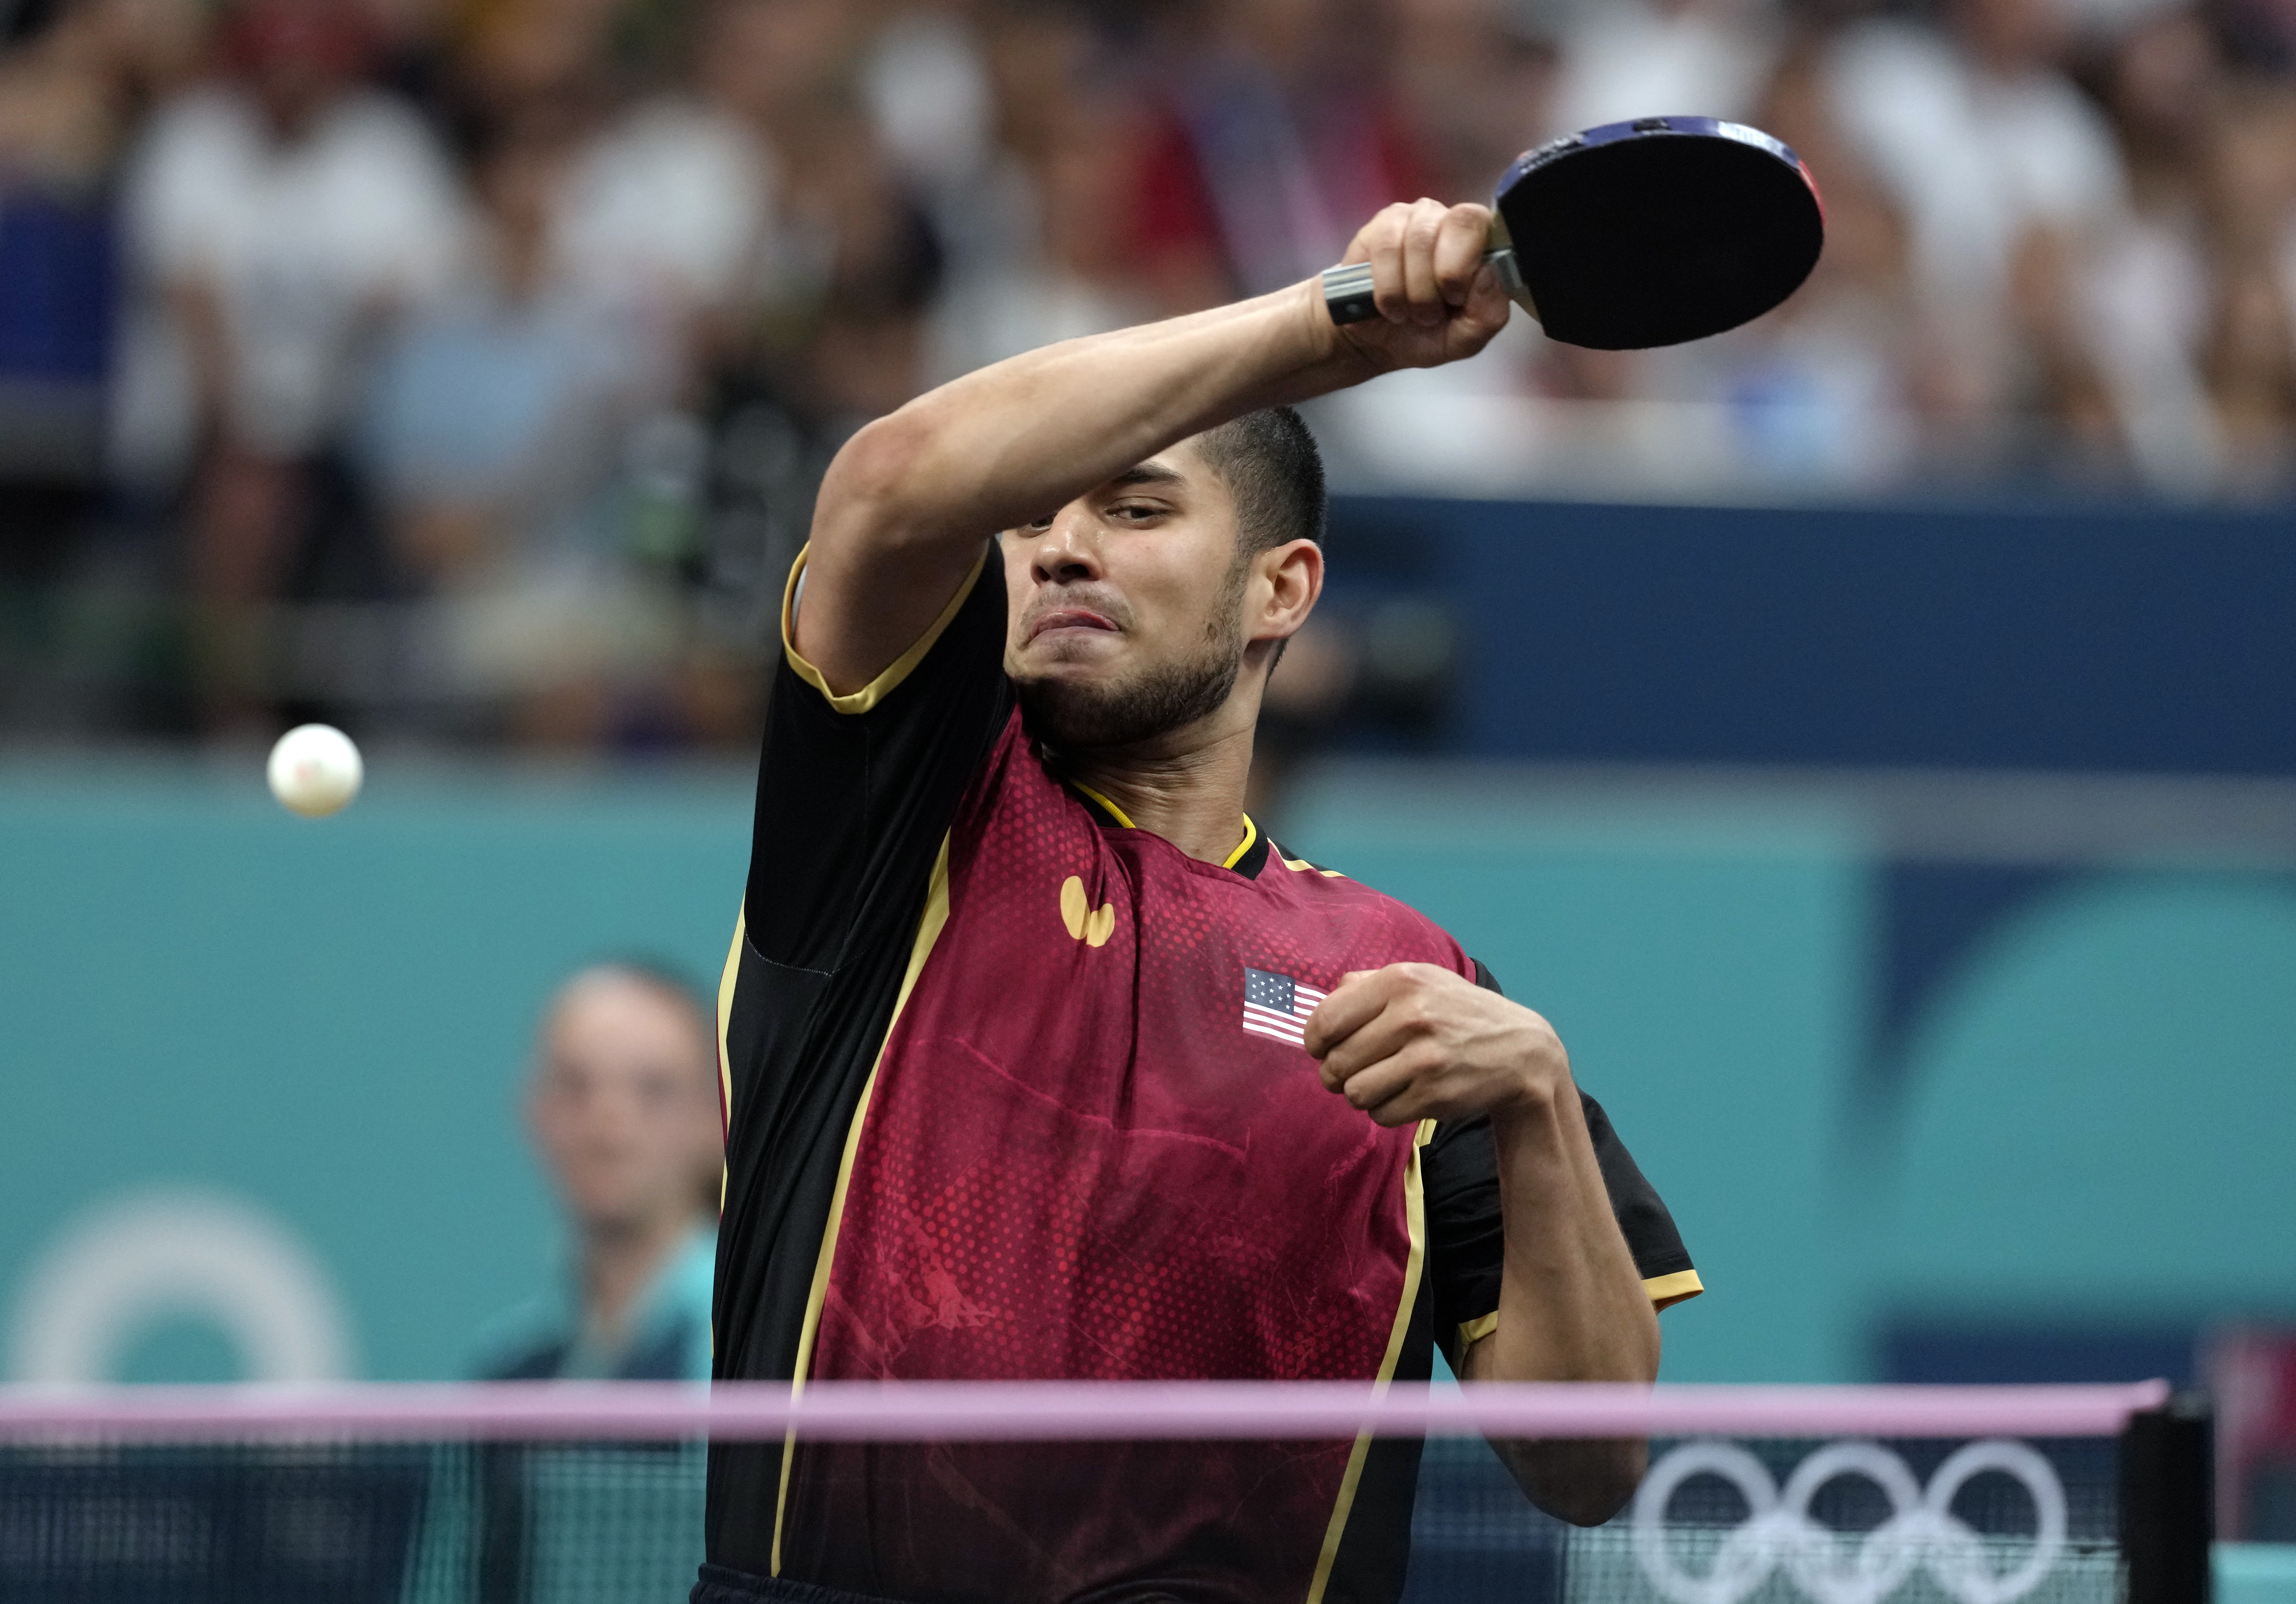 Jha makes history for US in men's table tennis, world No. 1 from China loses in round of 32